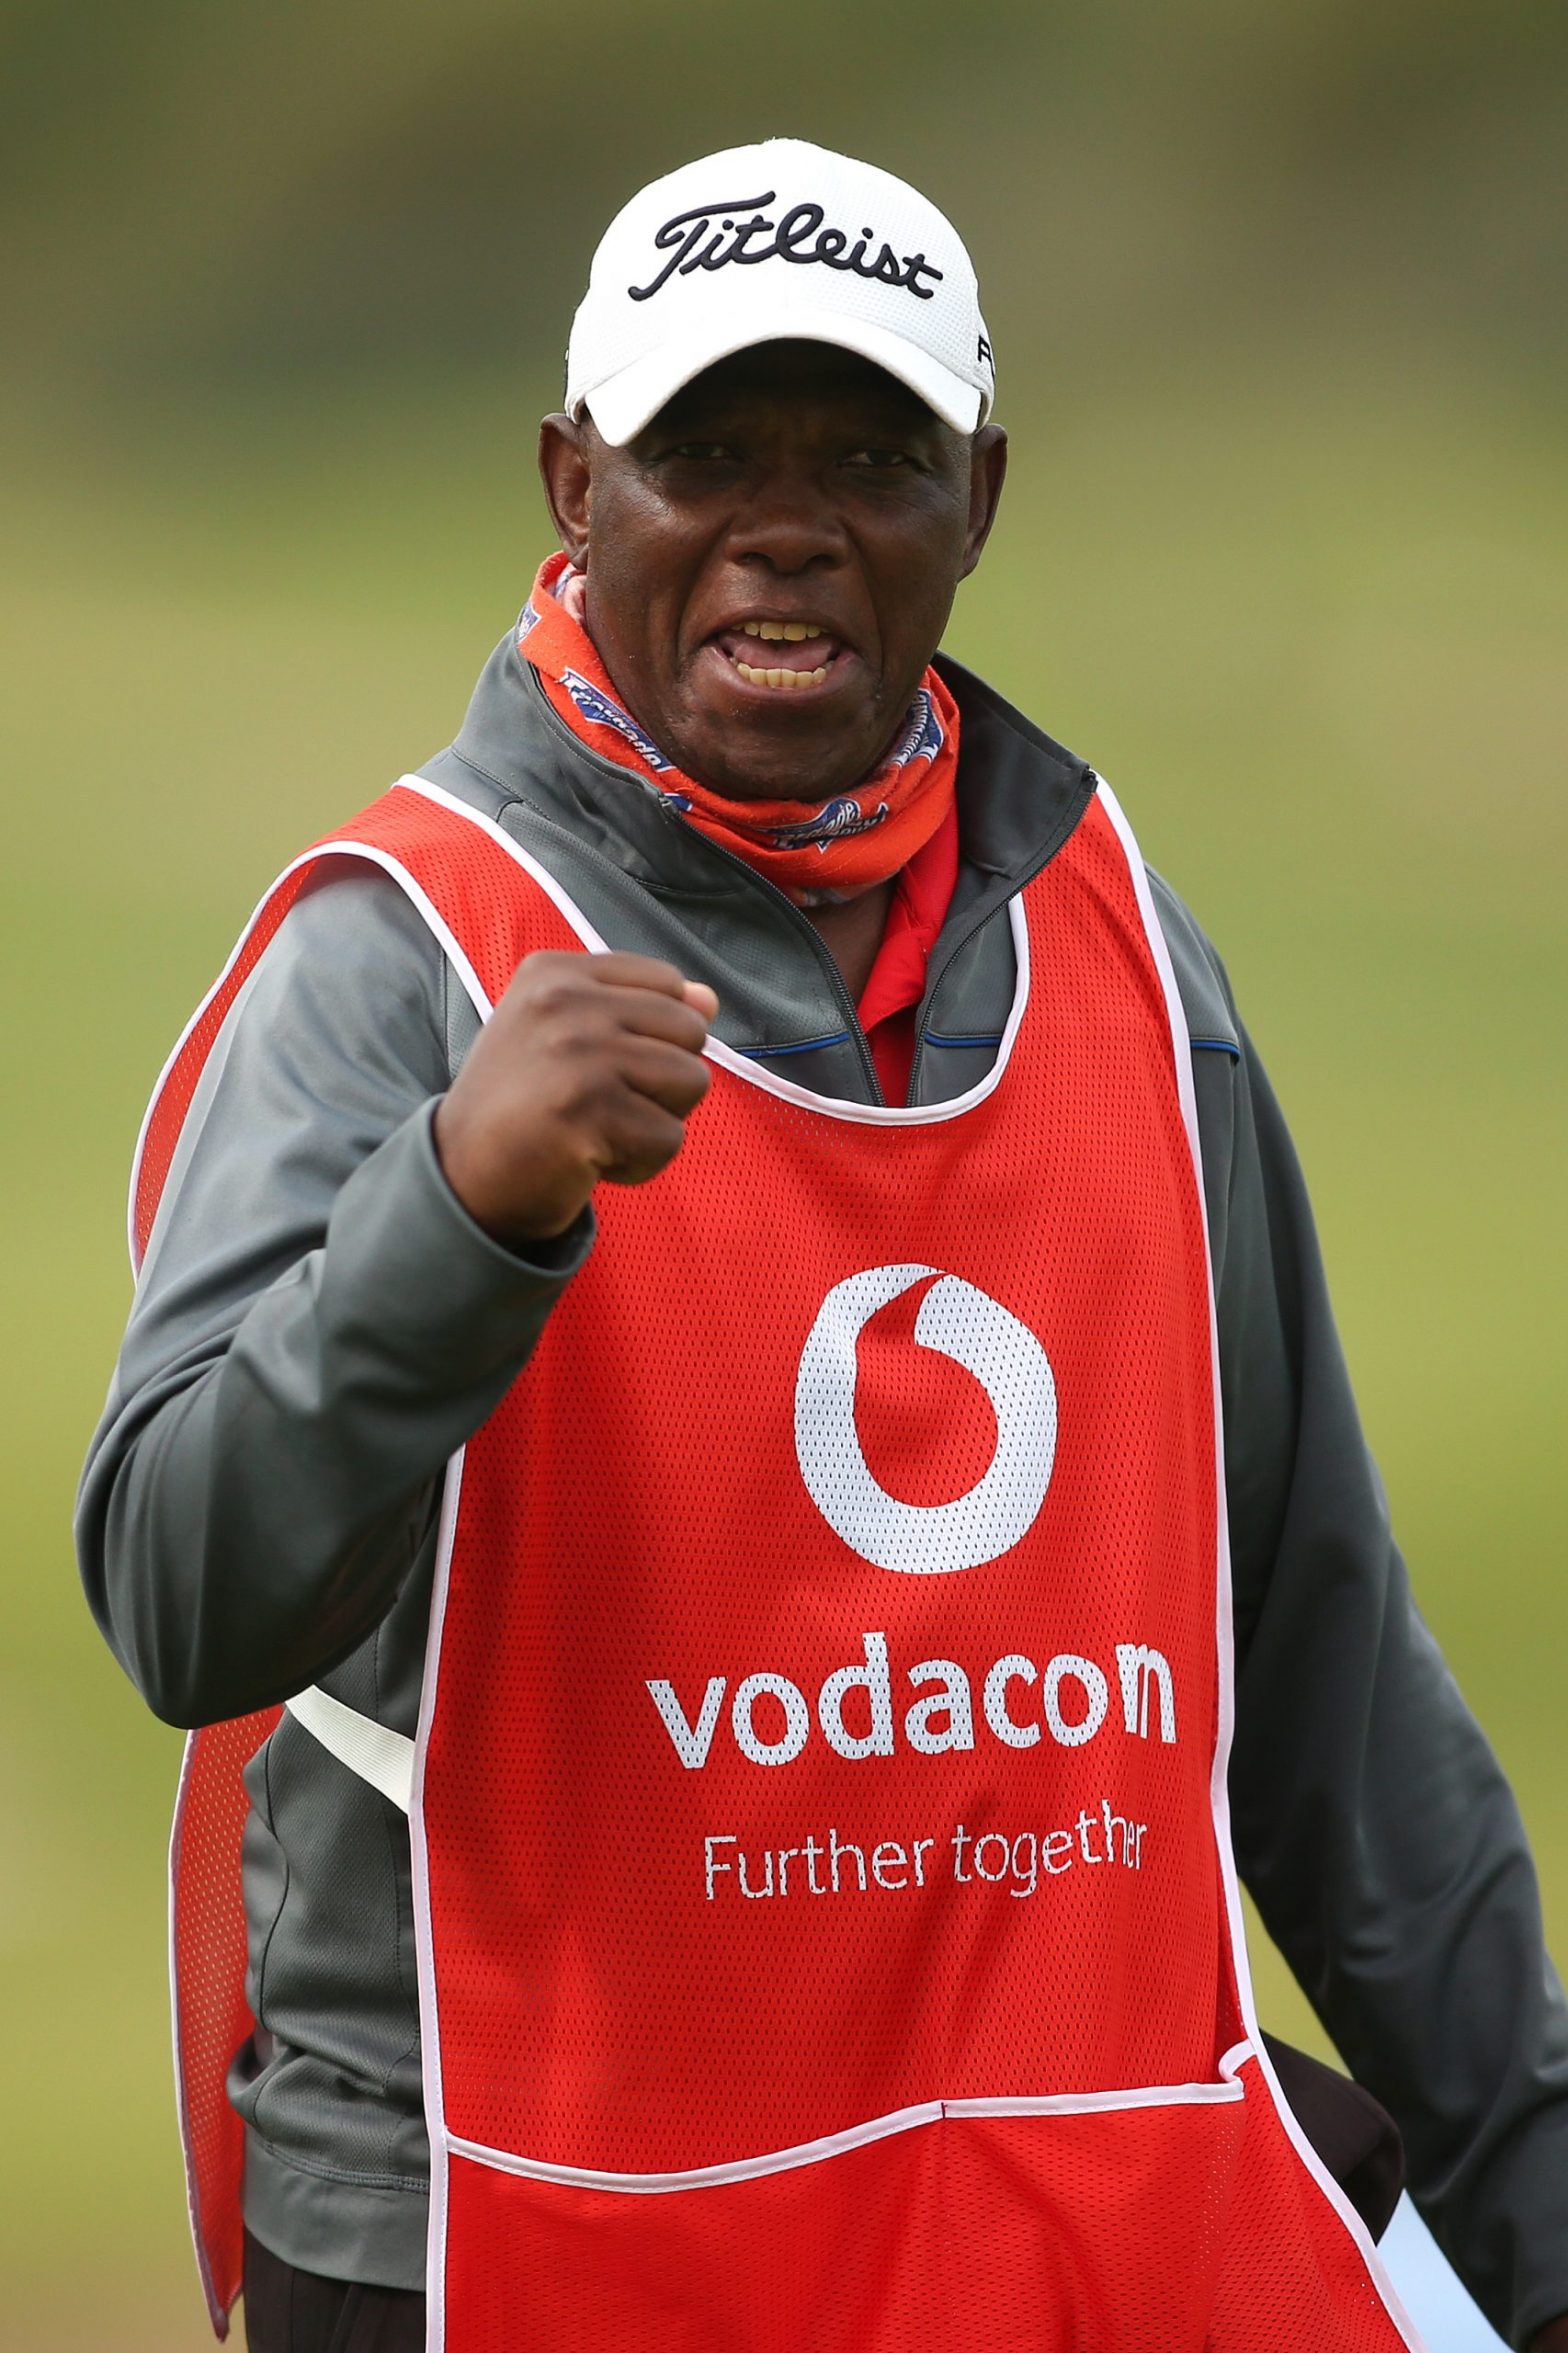 Vodacom supports Sunshine Tour caddies with donation